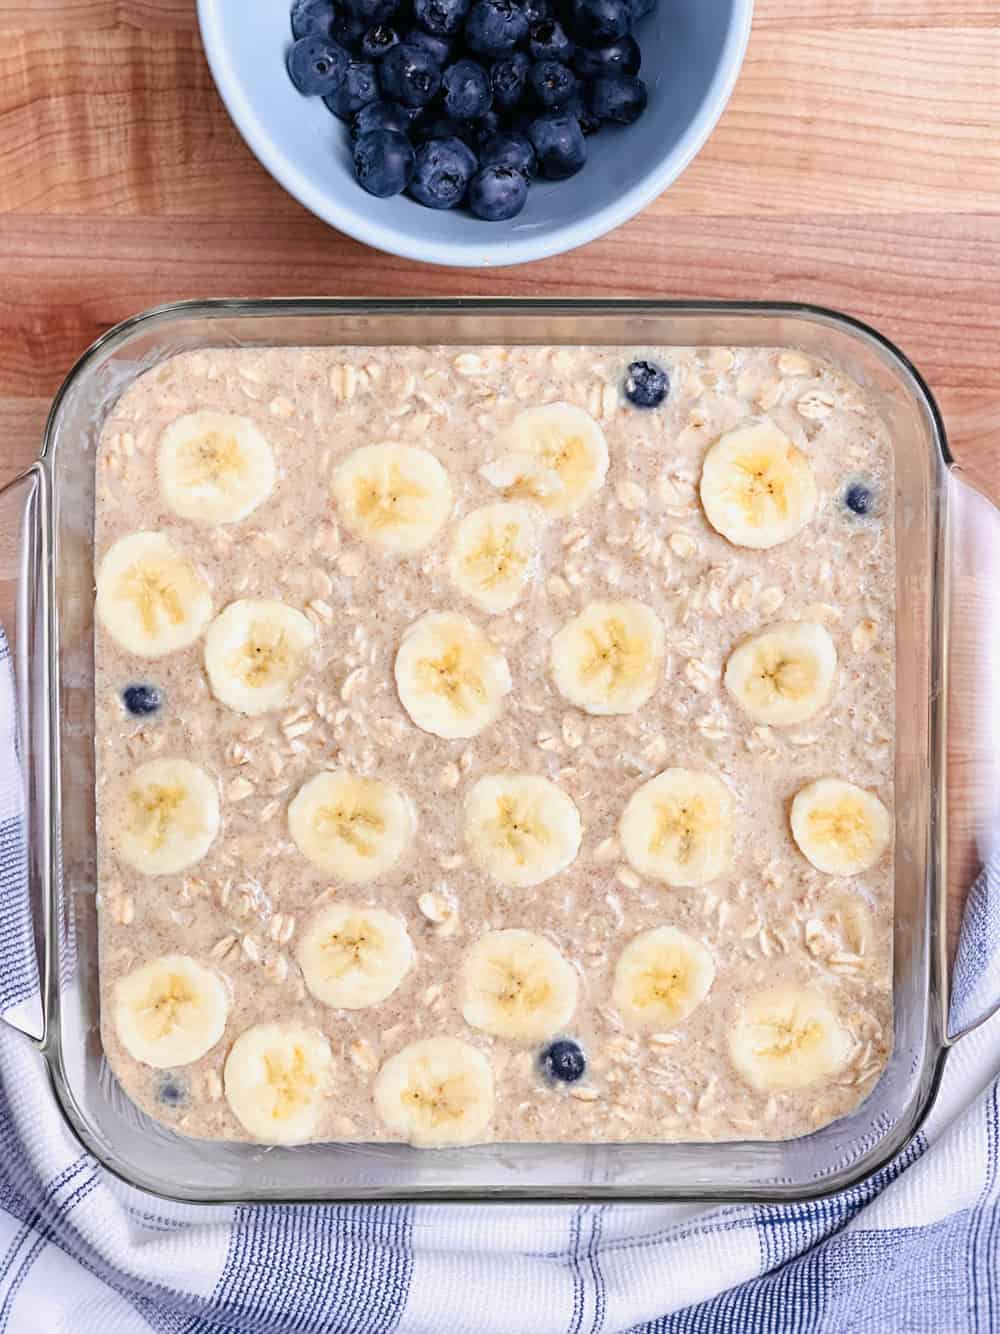 baked oatmeal cake made with blueberries and bananas